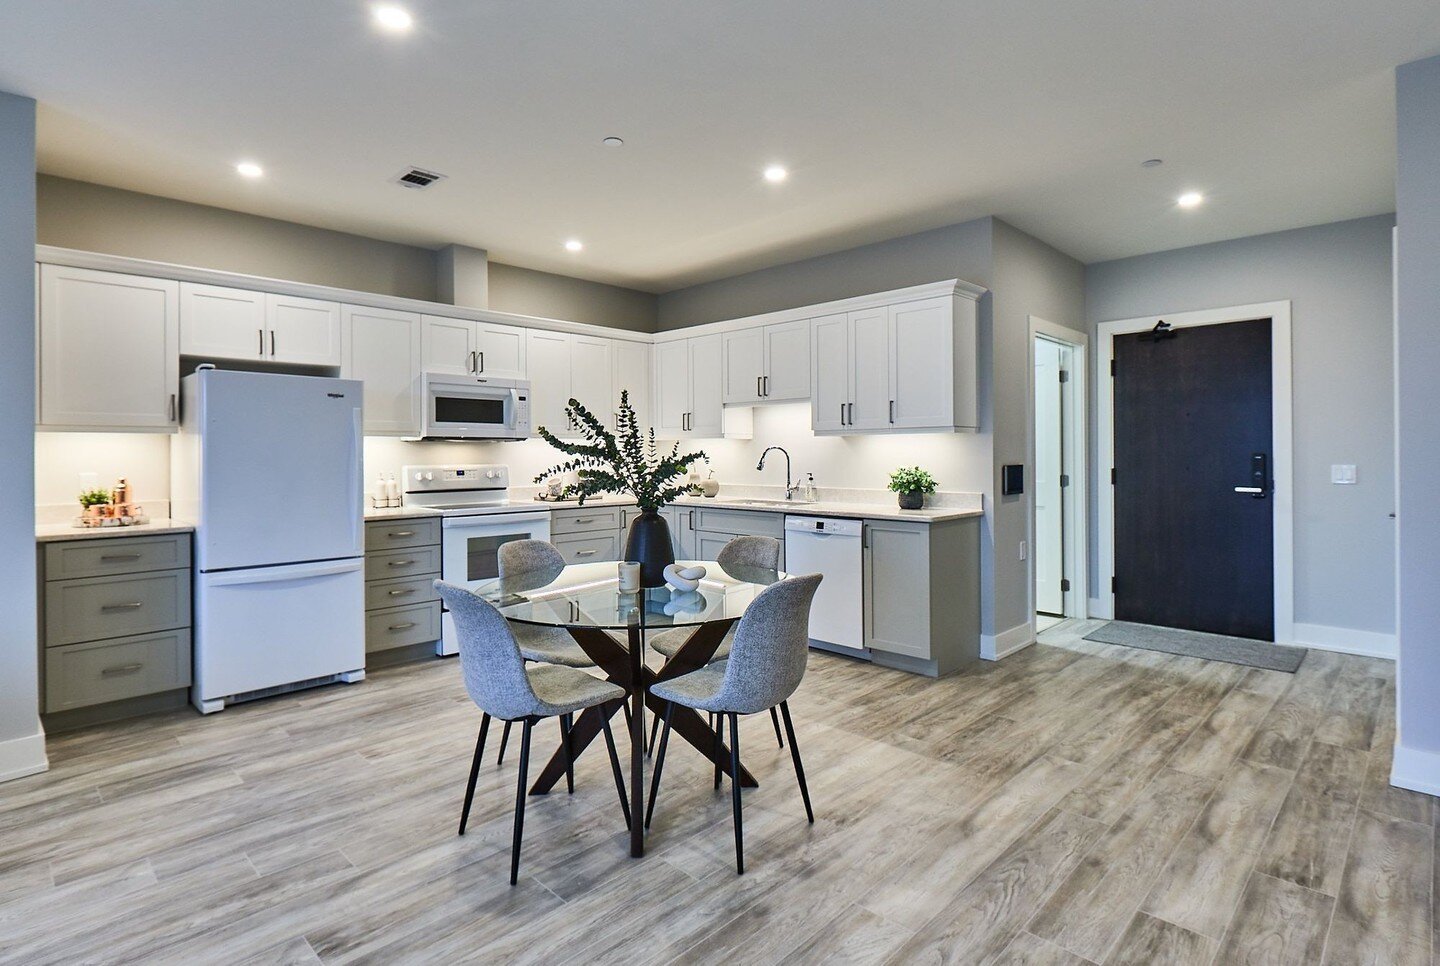 Upon entry to unit 102 at &ldquo;The Alexander Building,&rdquo; 18 Campus Trail ($699,000), you will be immediately impressed by the unmistakable quality of craftsmanship and will continue to be wowed as you meander throughout the space.

This stunni